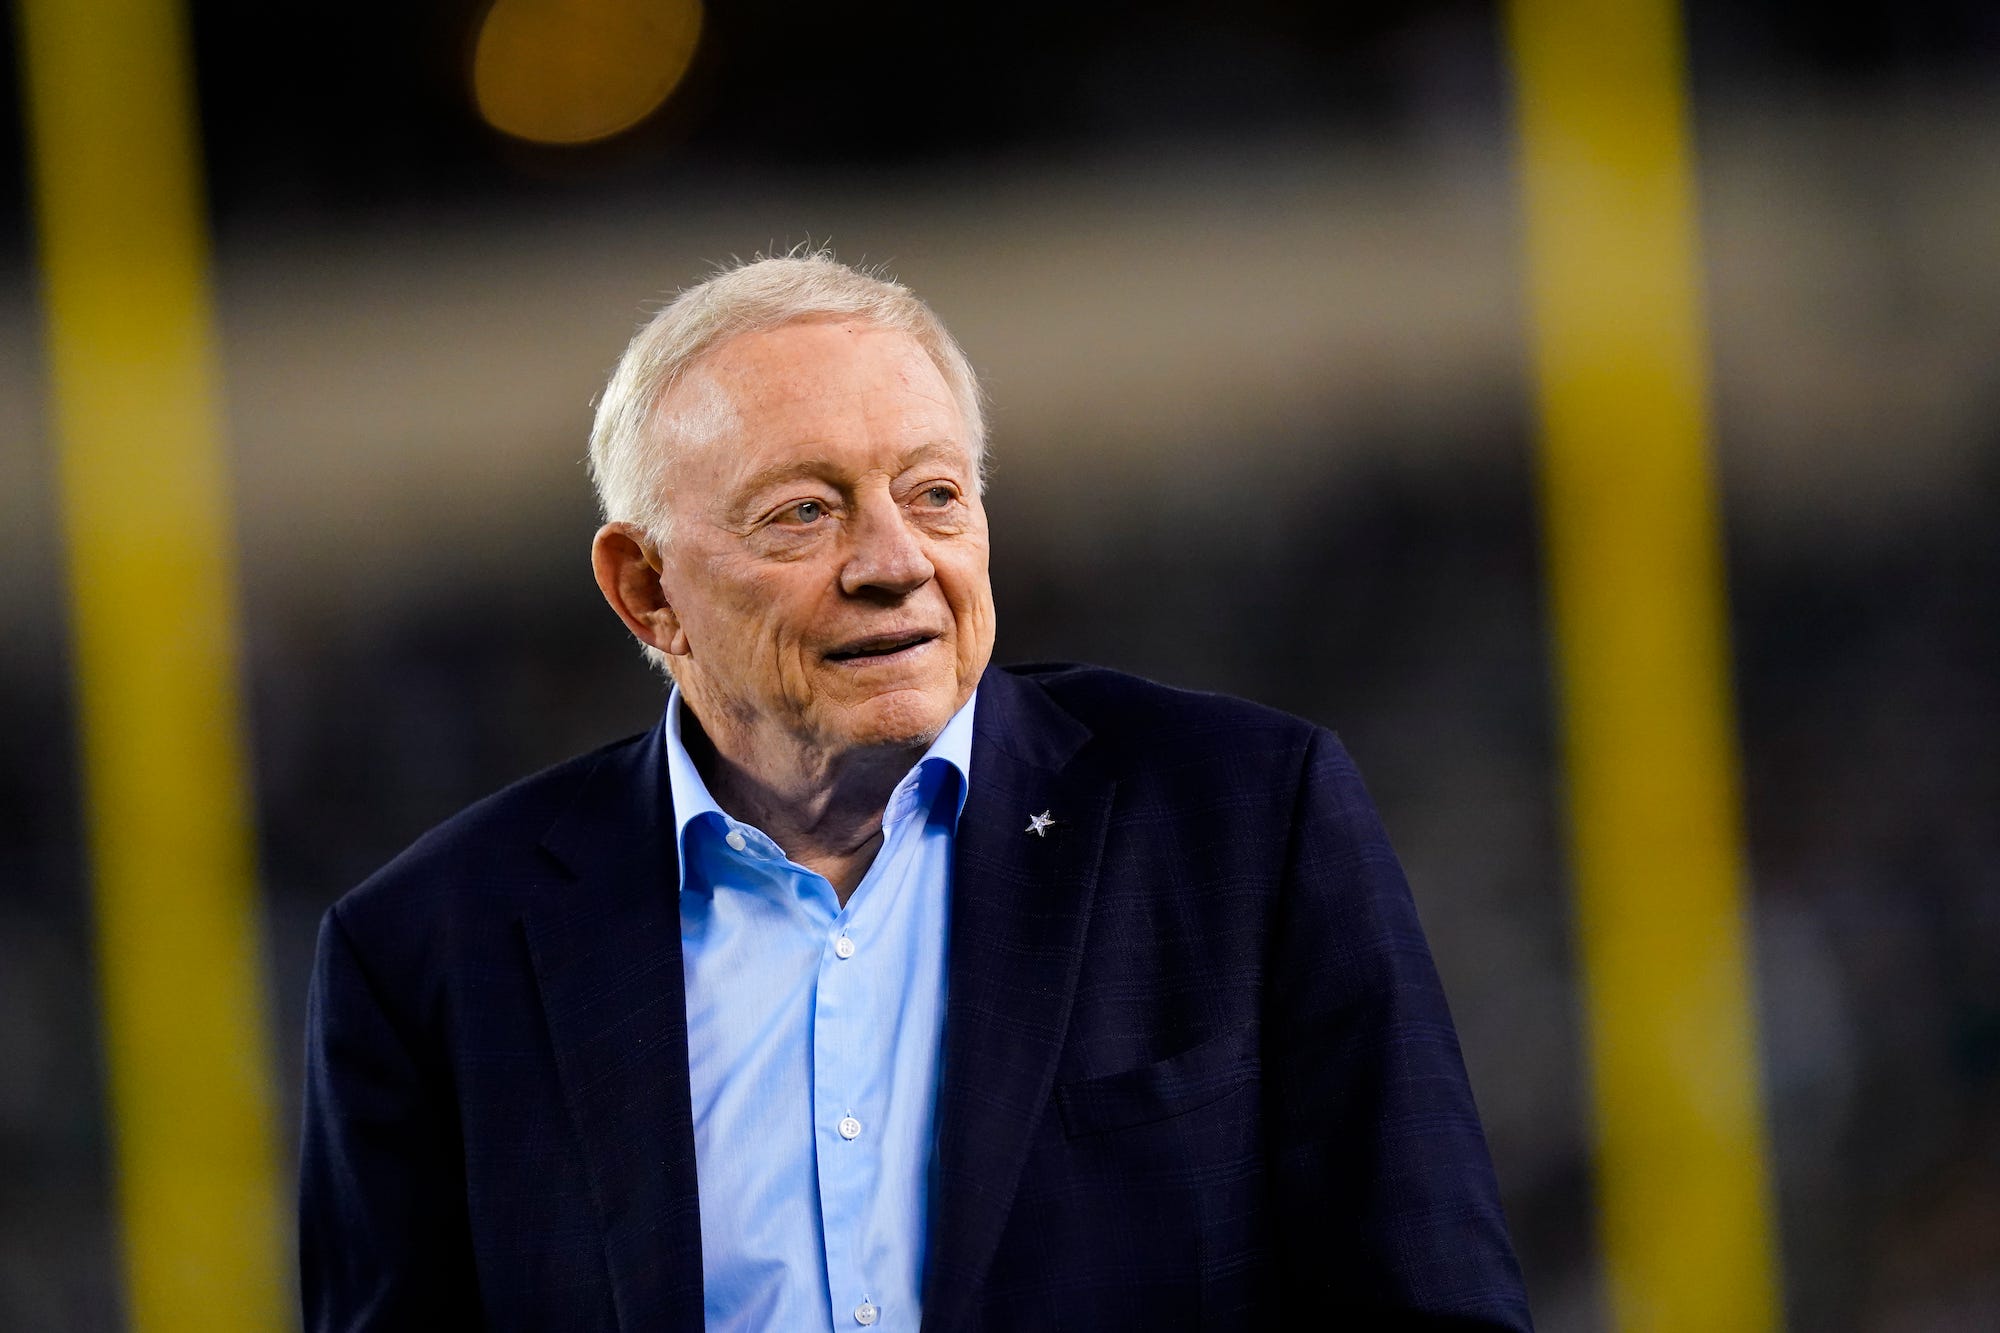 <p>Jones, who is worth $13.1 billion, bought the Dallas Cowboys in 1989 for $140 million. His investment has more than paid off: The football team is believed to be the most valuable in the world, worth an estimated $9 billion.</p>